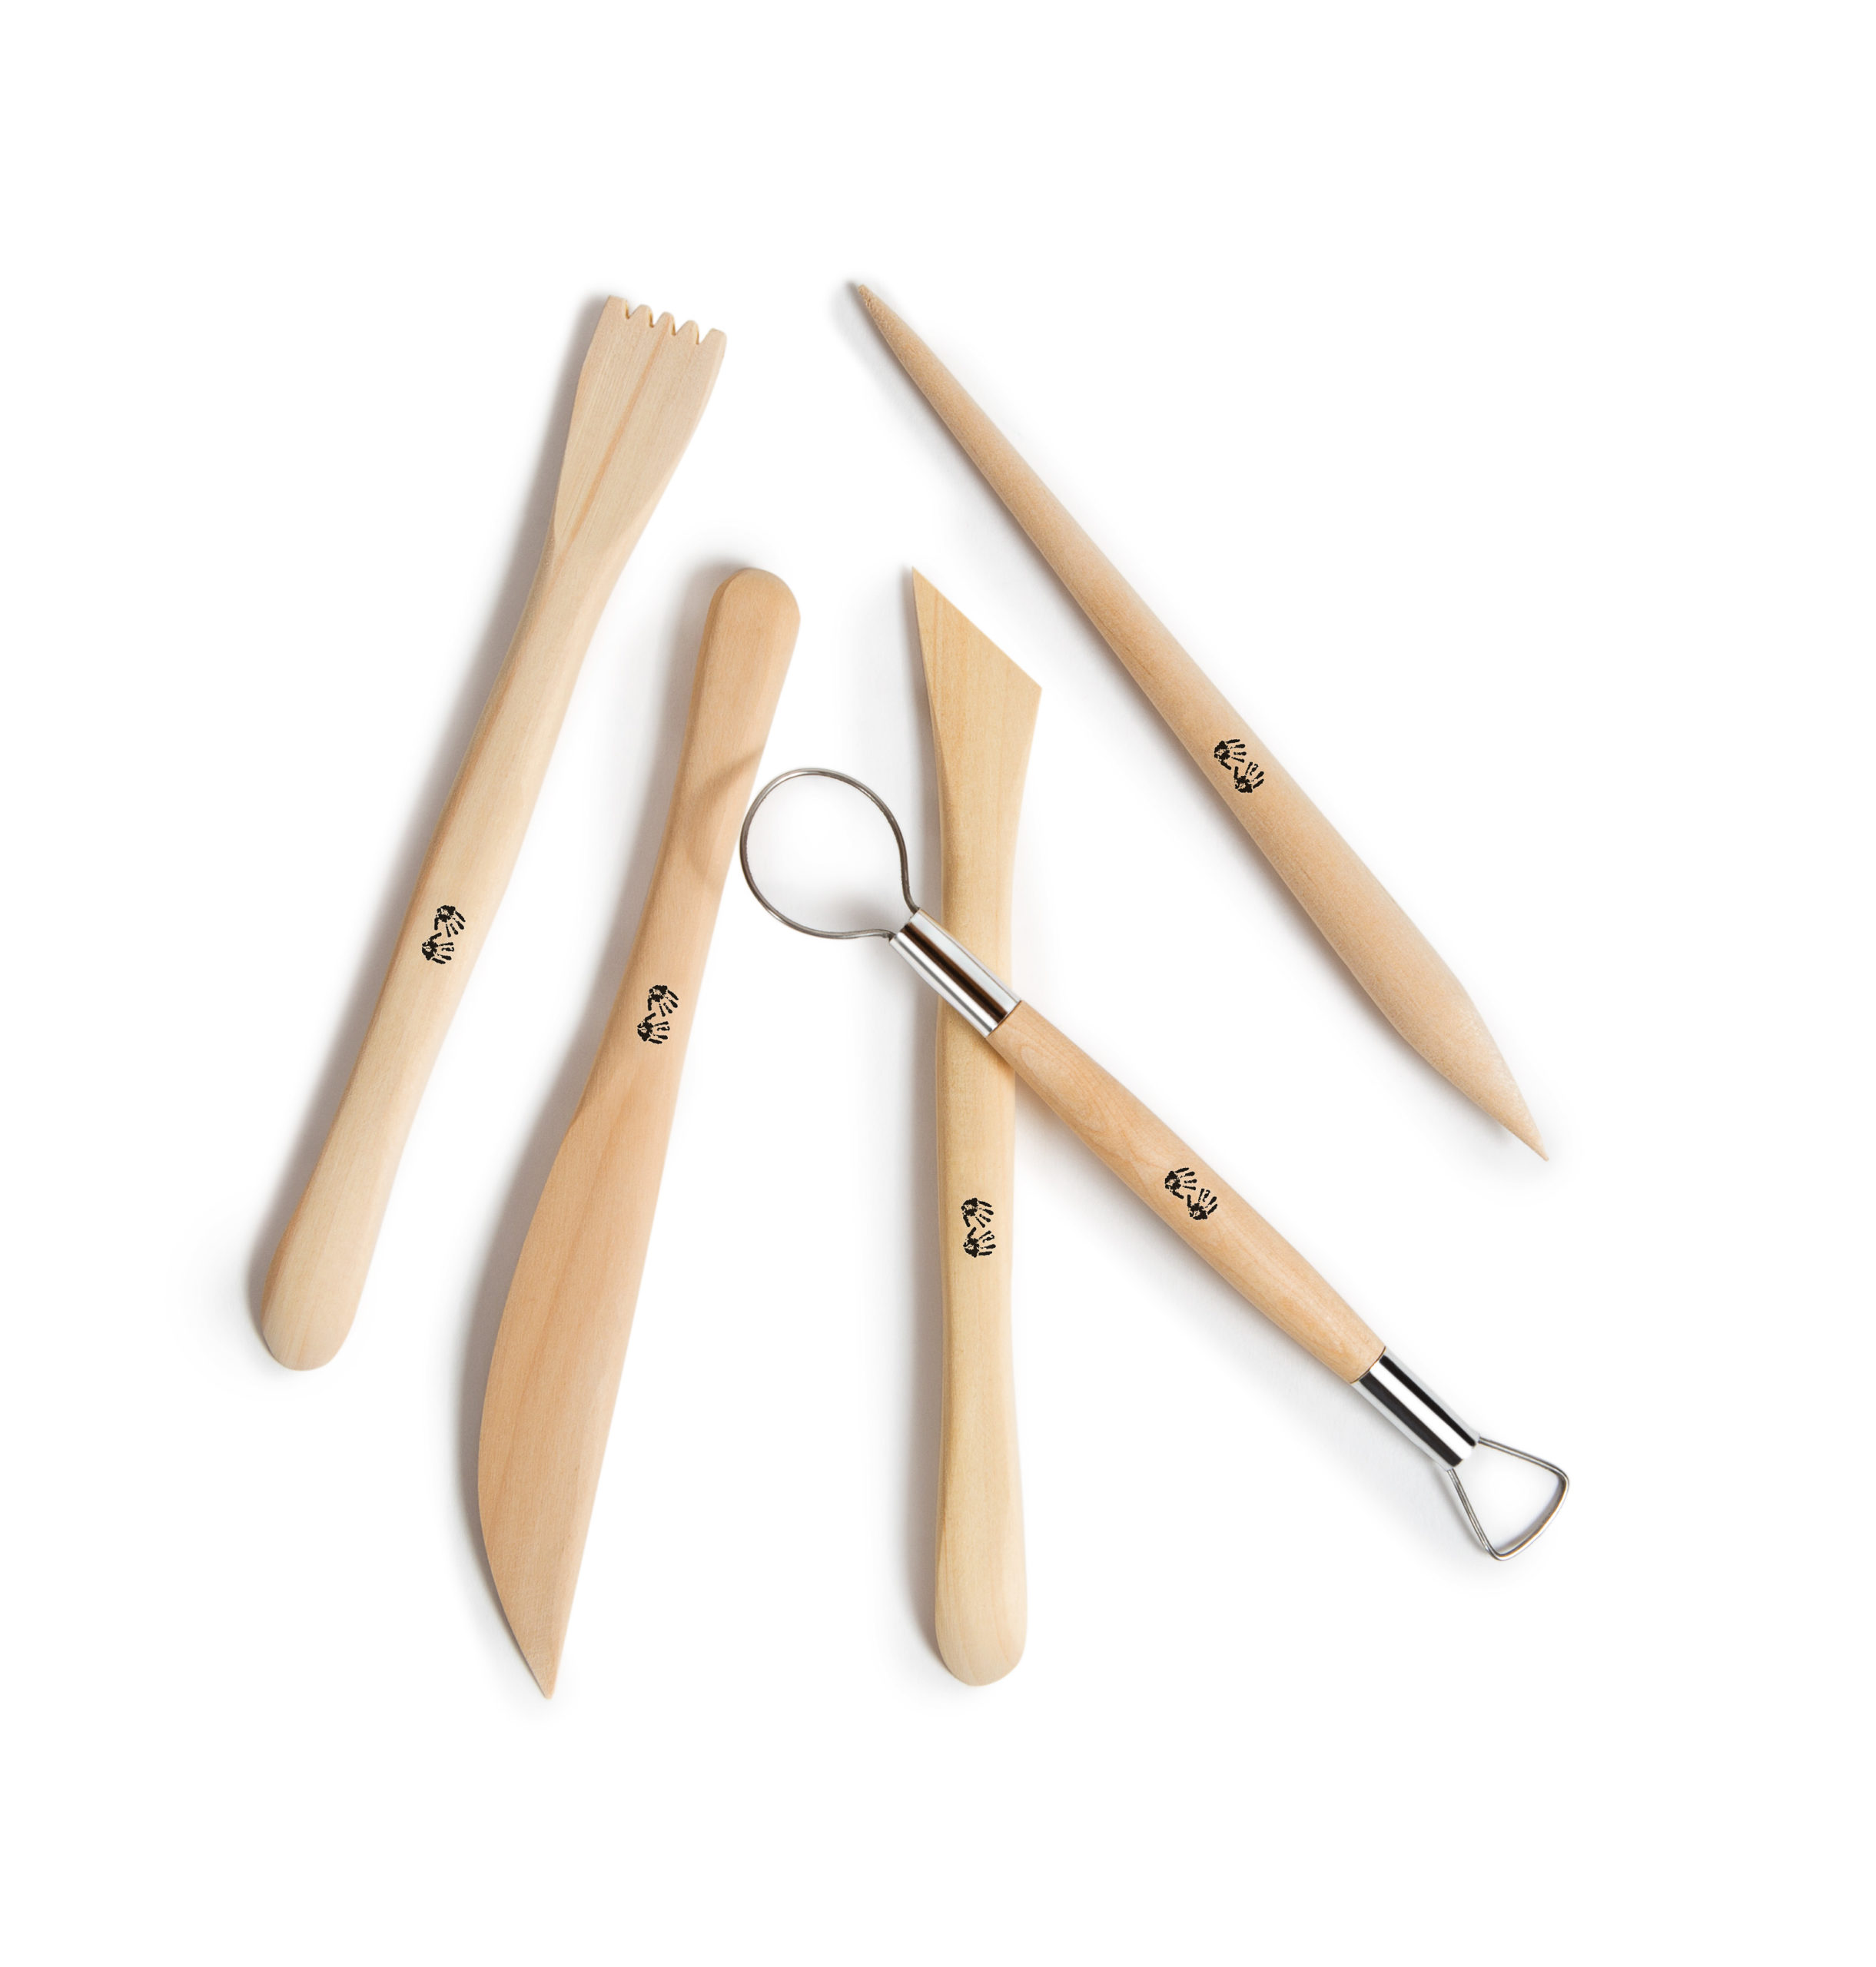 5 pc. RedWood Tool Set - Aves: Maker of Fine Clays and Maches, Apoxie  Sculpt, Epoxy Putty and More